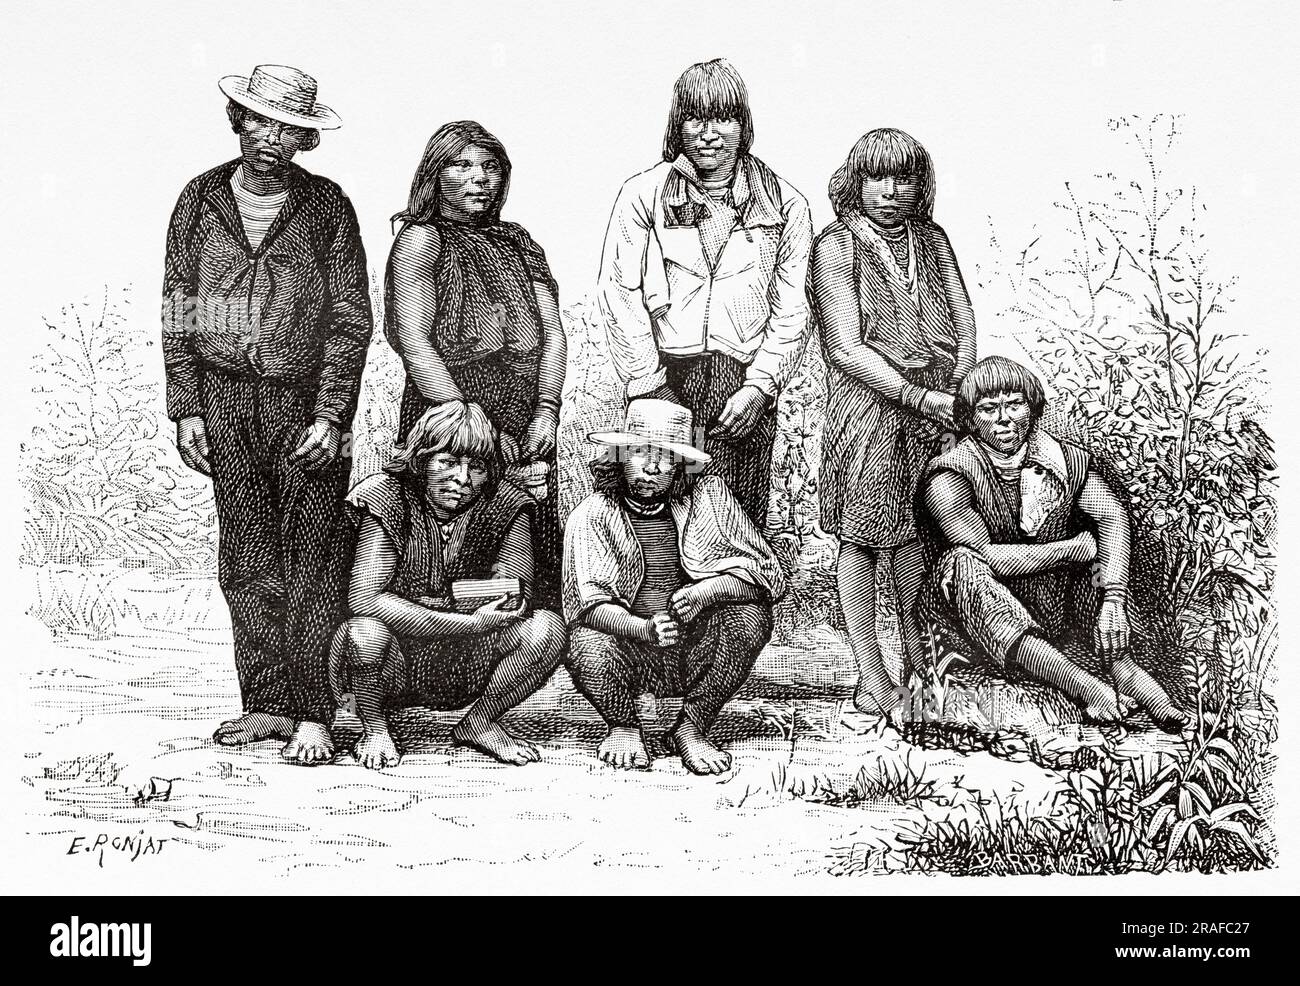 Cocamilla Indians, native Peruvian indigenous people. Peru, South America. Amazon and mountain ranges by Charles Wiener Mahler, 1879-1882. Old 19th century engraving from Le Tour du Monde 1906 Stock Photo